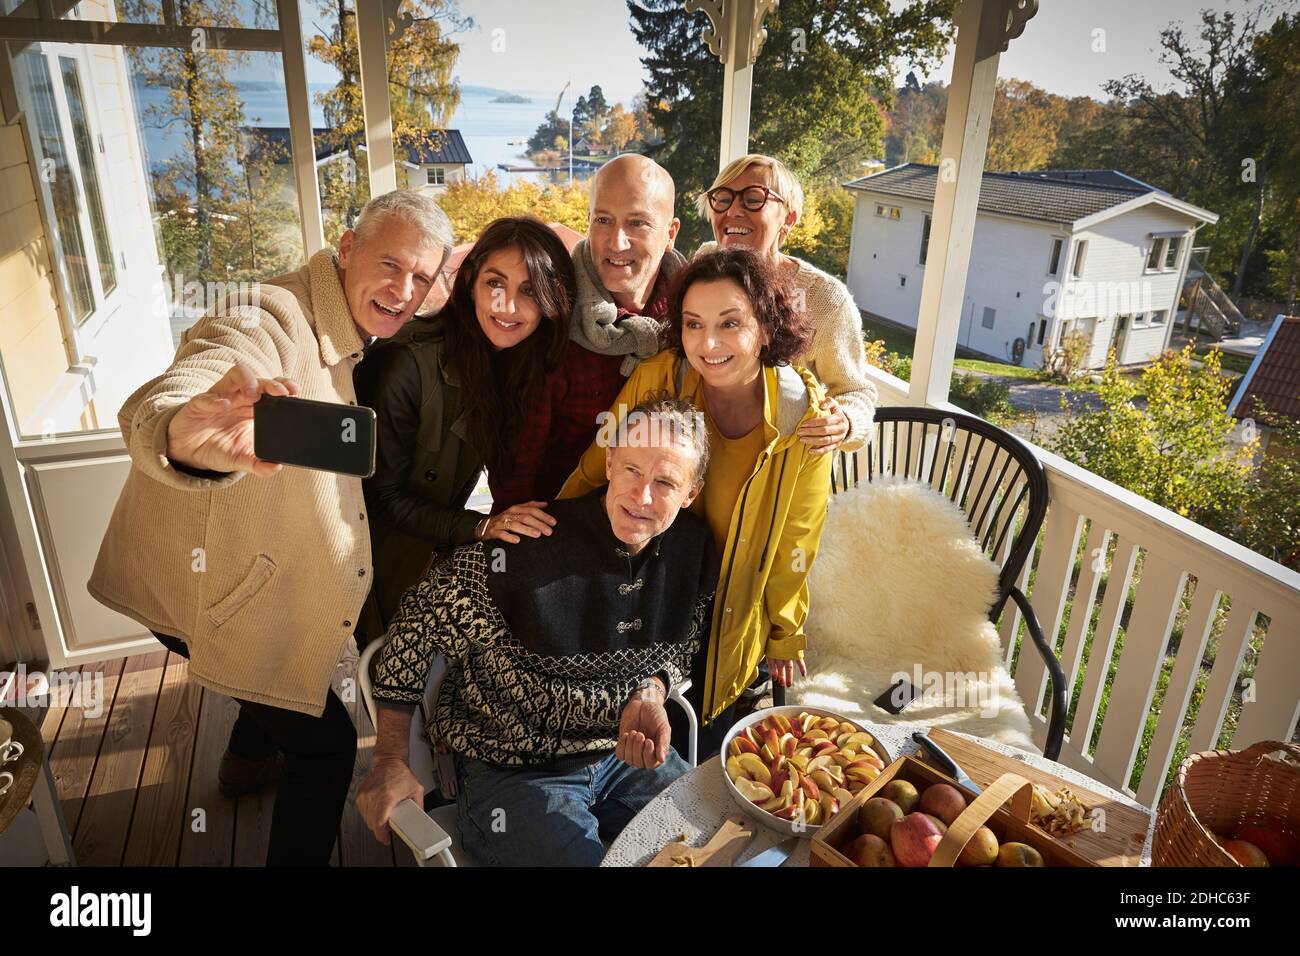 High angle view of happy mature man taking selfie with friends on porch Stock Photo